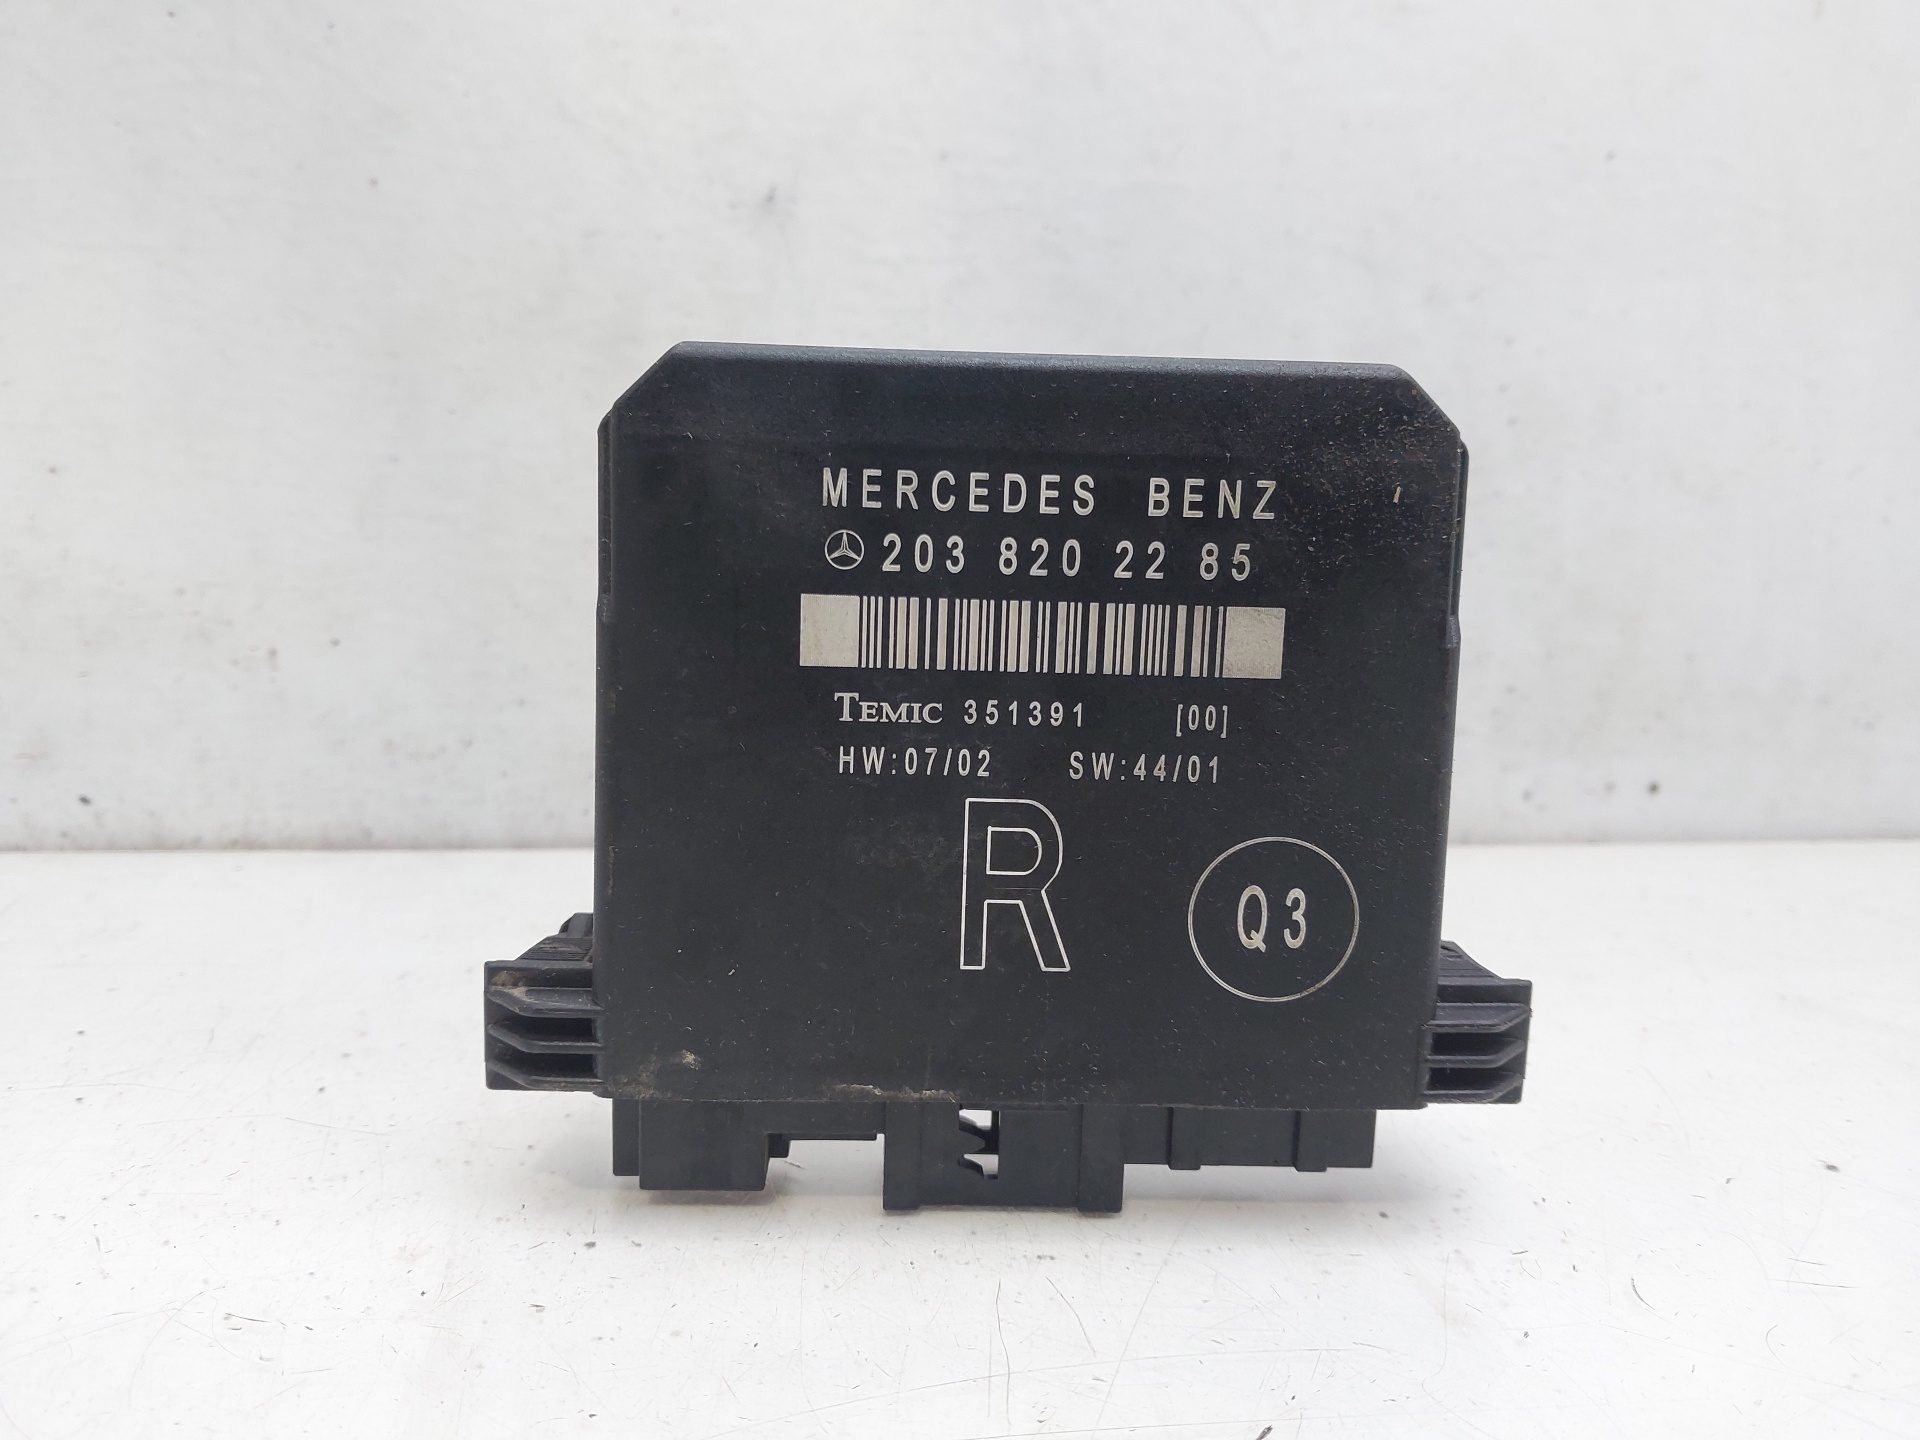 MERCEDES-BENZ C-Class W203/S203/CL203 (2000-2008) Other Control Units 2038202285 23071474